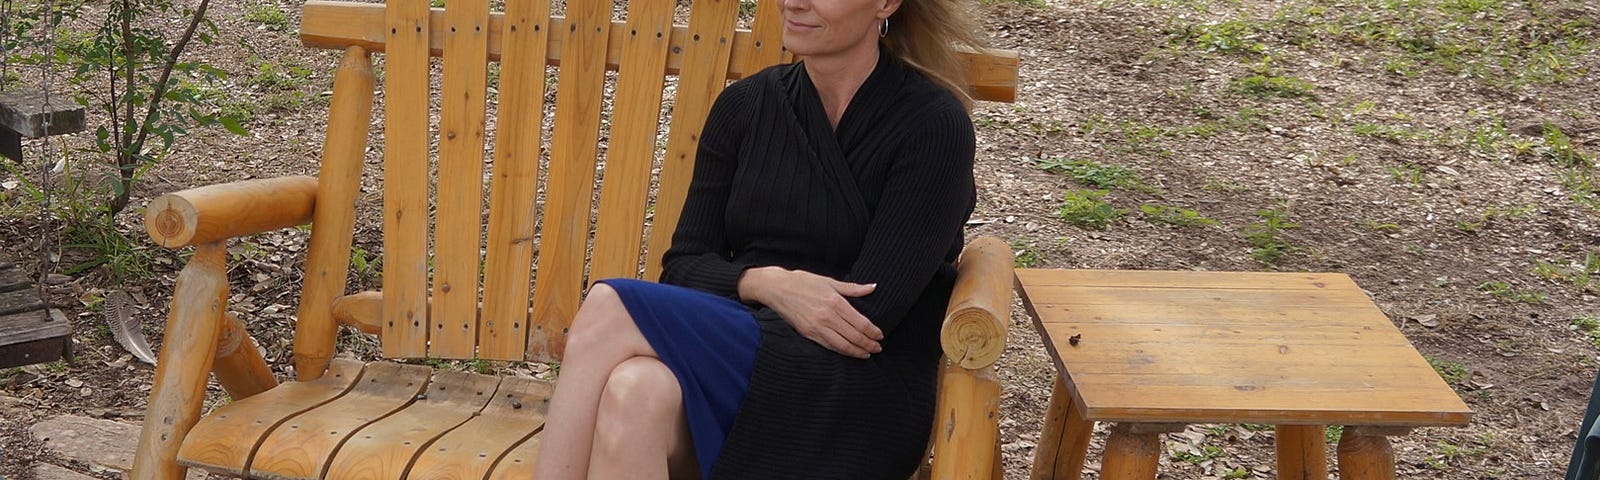 A woman sitting alone on a bench, looking at the photographer.